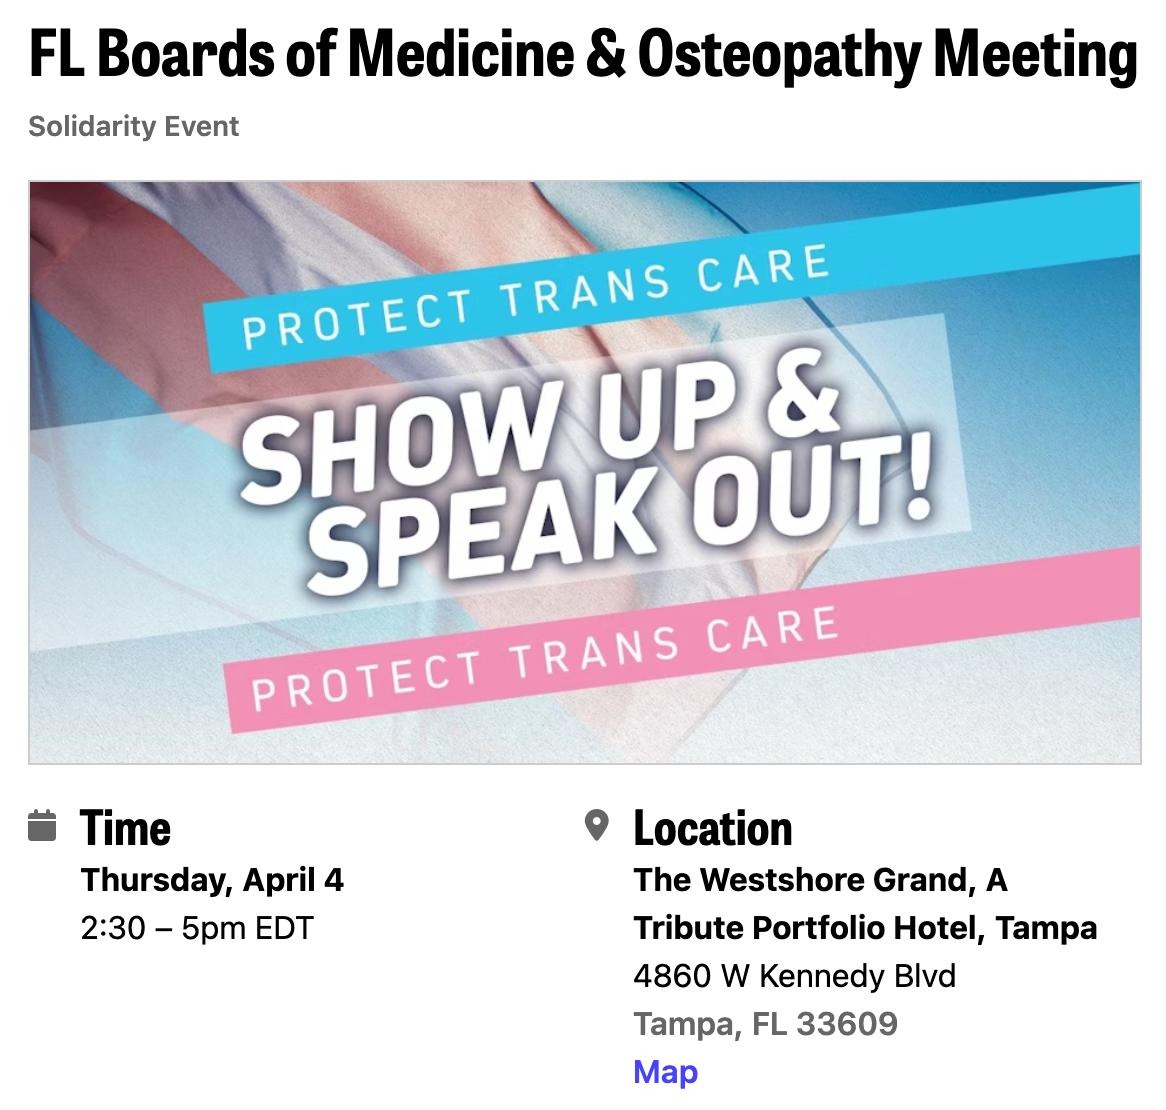 ICYMI: Important meeting in Tampa this Thursday that will impact Gender Affirming Care. See more details from @equalityfl and find link to RSVP here: mobilize.us/equalityflorid…